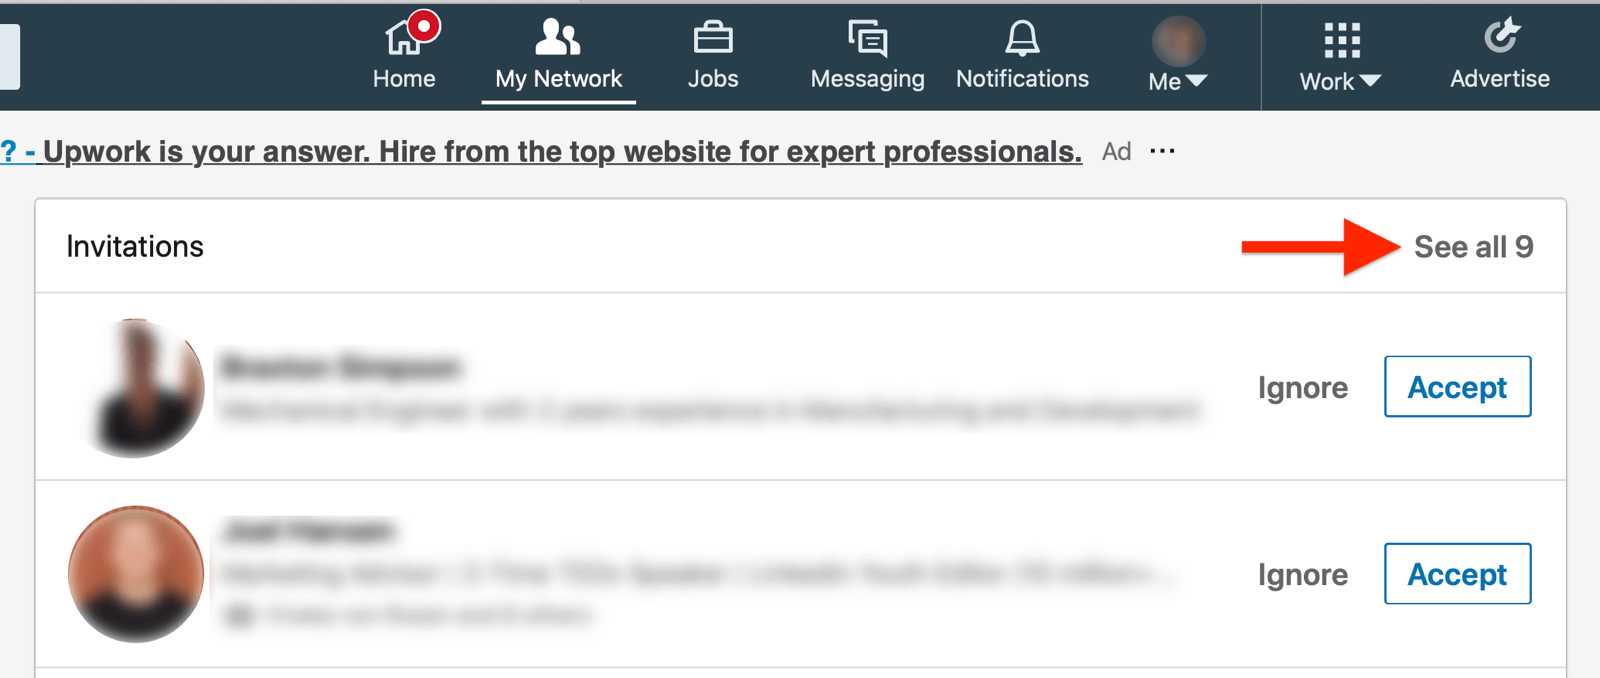 linkedin my network tab invitations page with the see all option highlighted